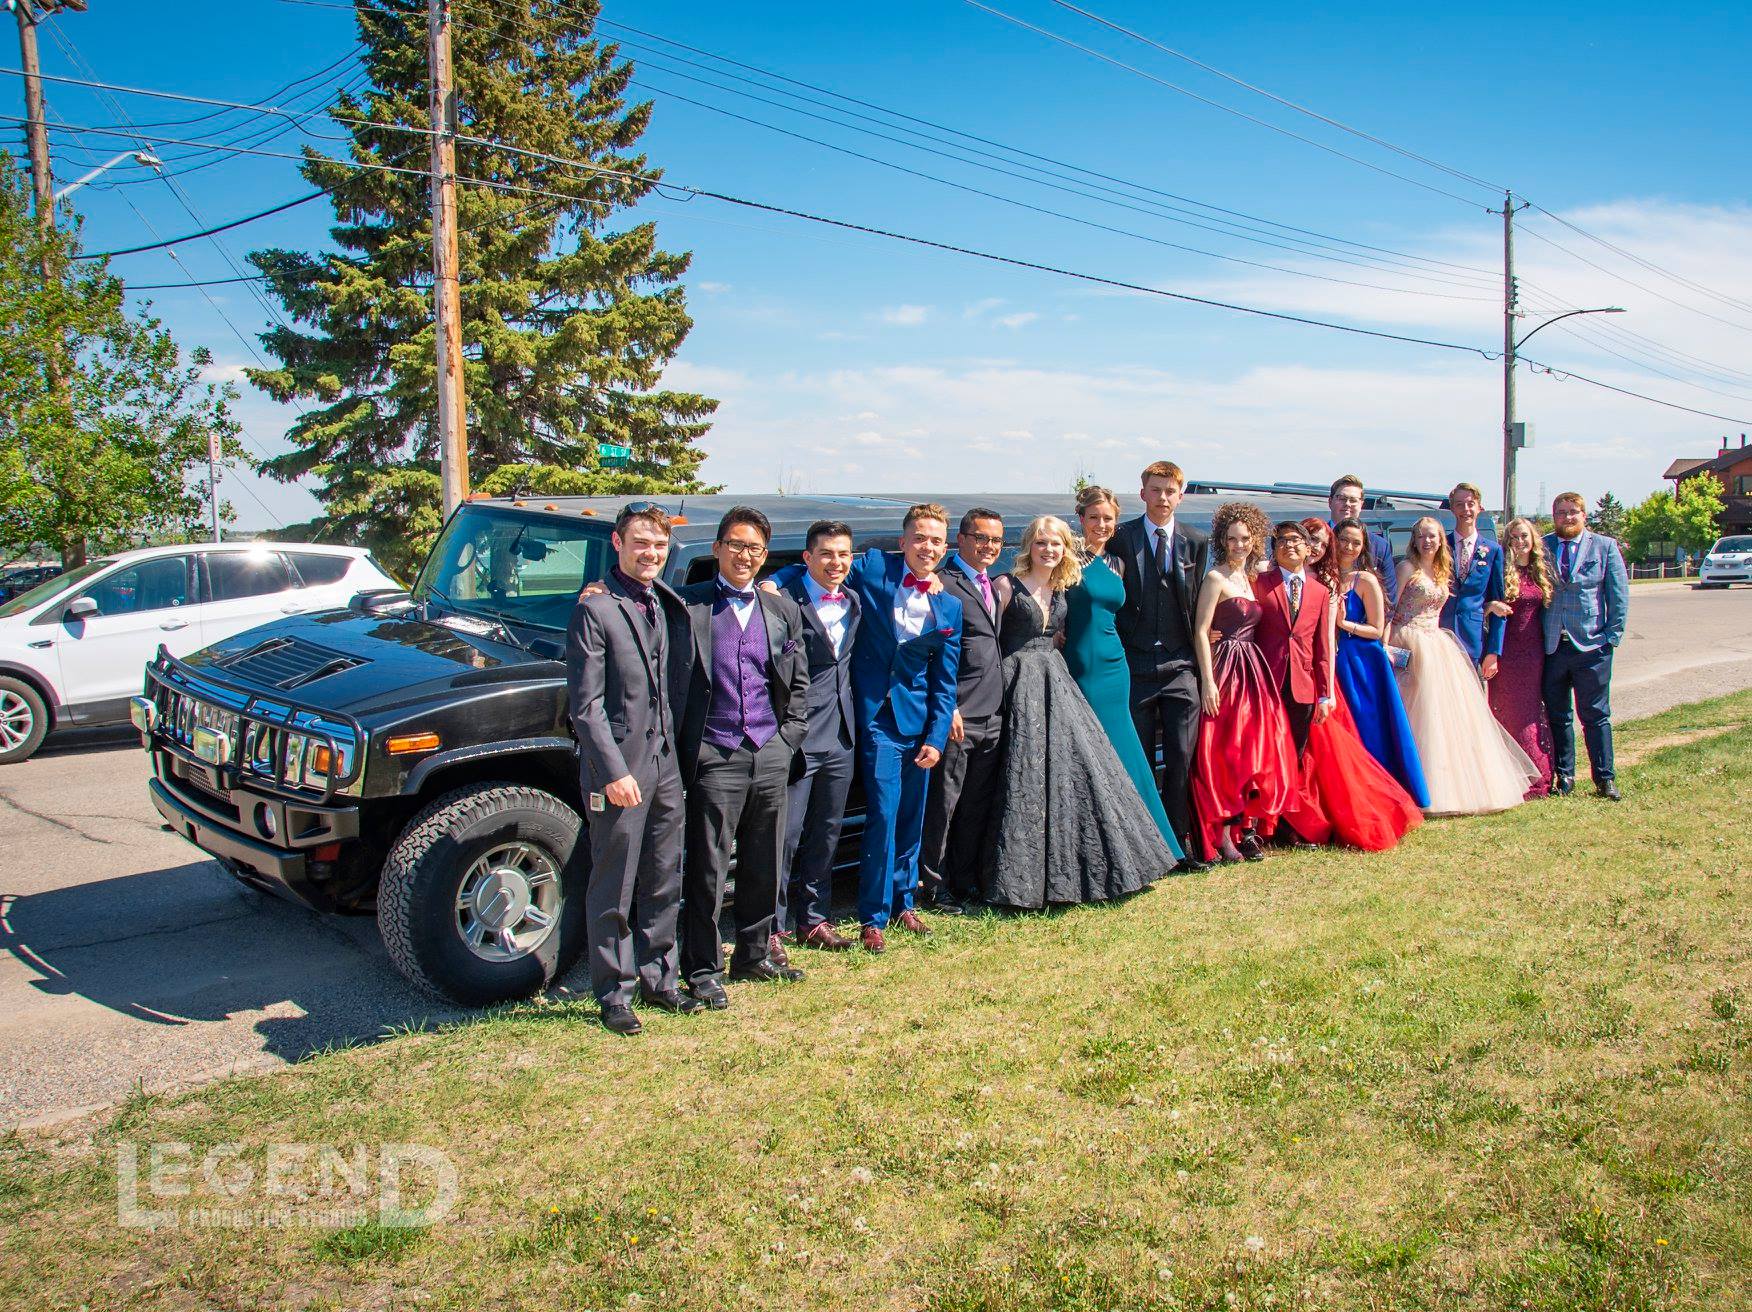 Graduation group photo in front of black Hummer Limousine